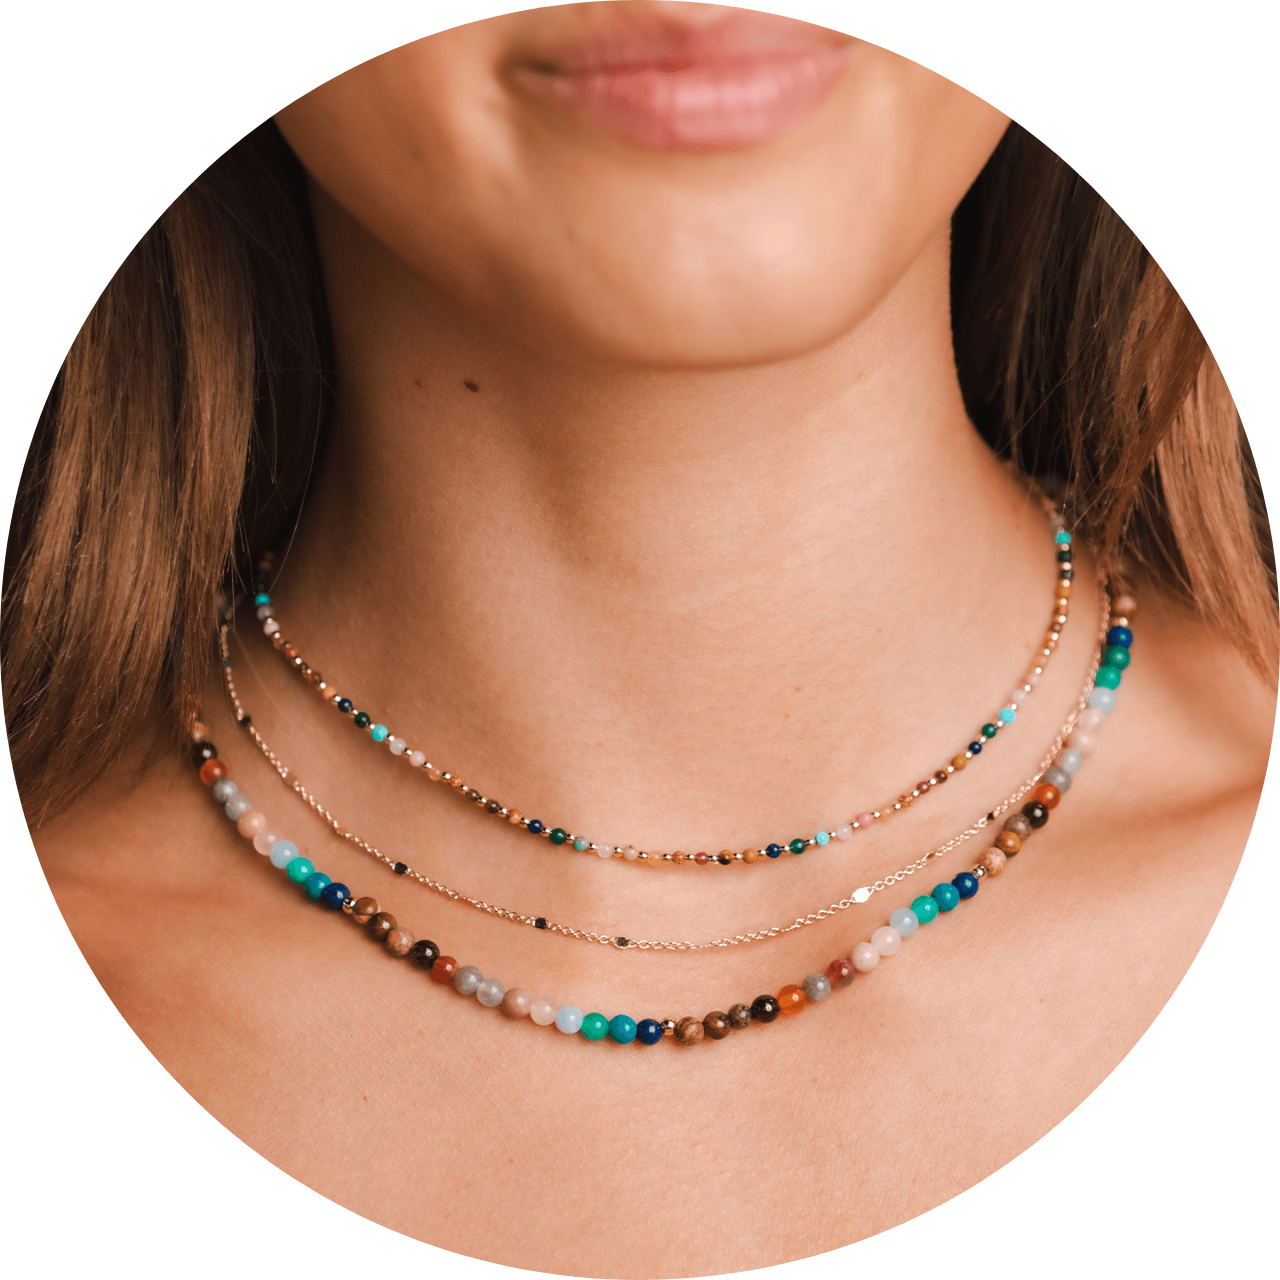 Model wearing a stack of healing necklaces. These necklaces include a 4mm multicolor stone healing necklace, a gold or silver chain necklace and a 2mm multicolored stone healing necklace.